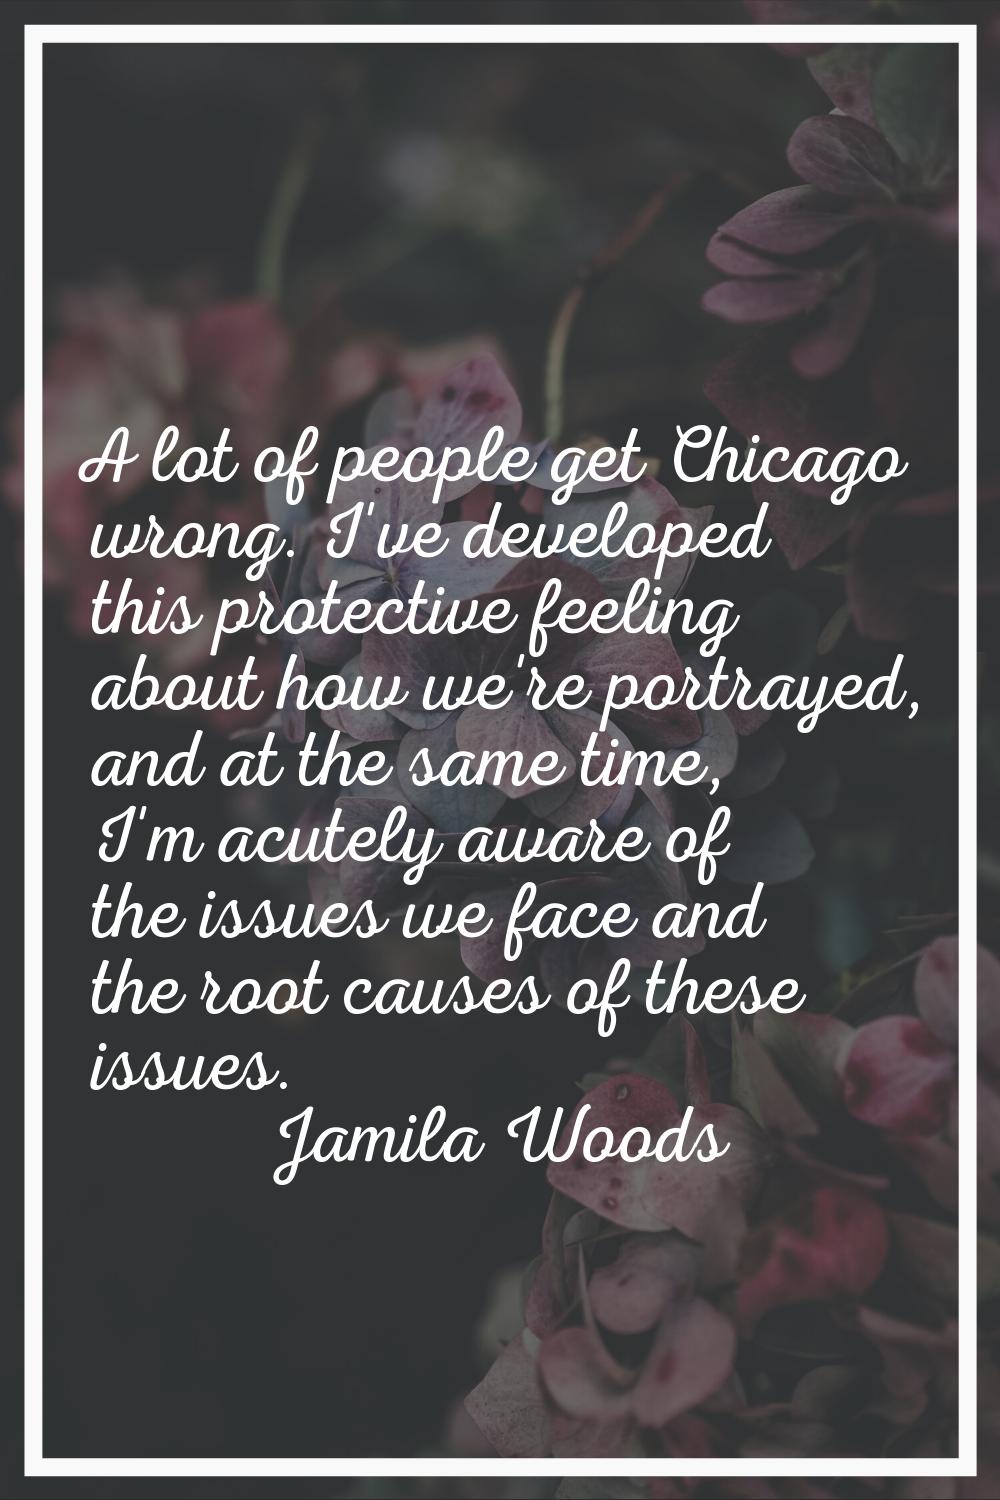 A lot of people get Chicago wrong. I've developed this protective feeling about how we're portrayed